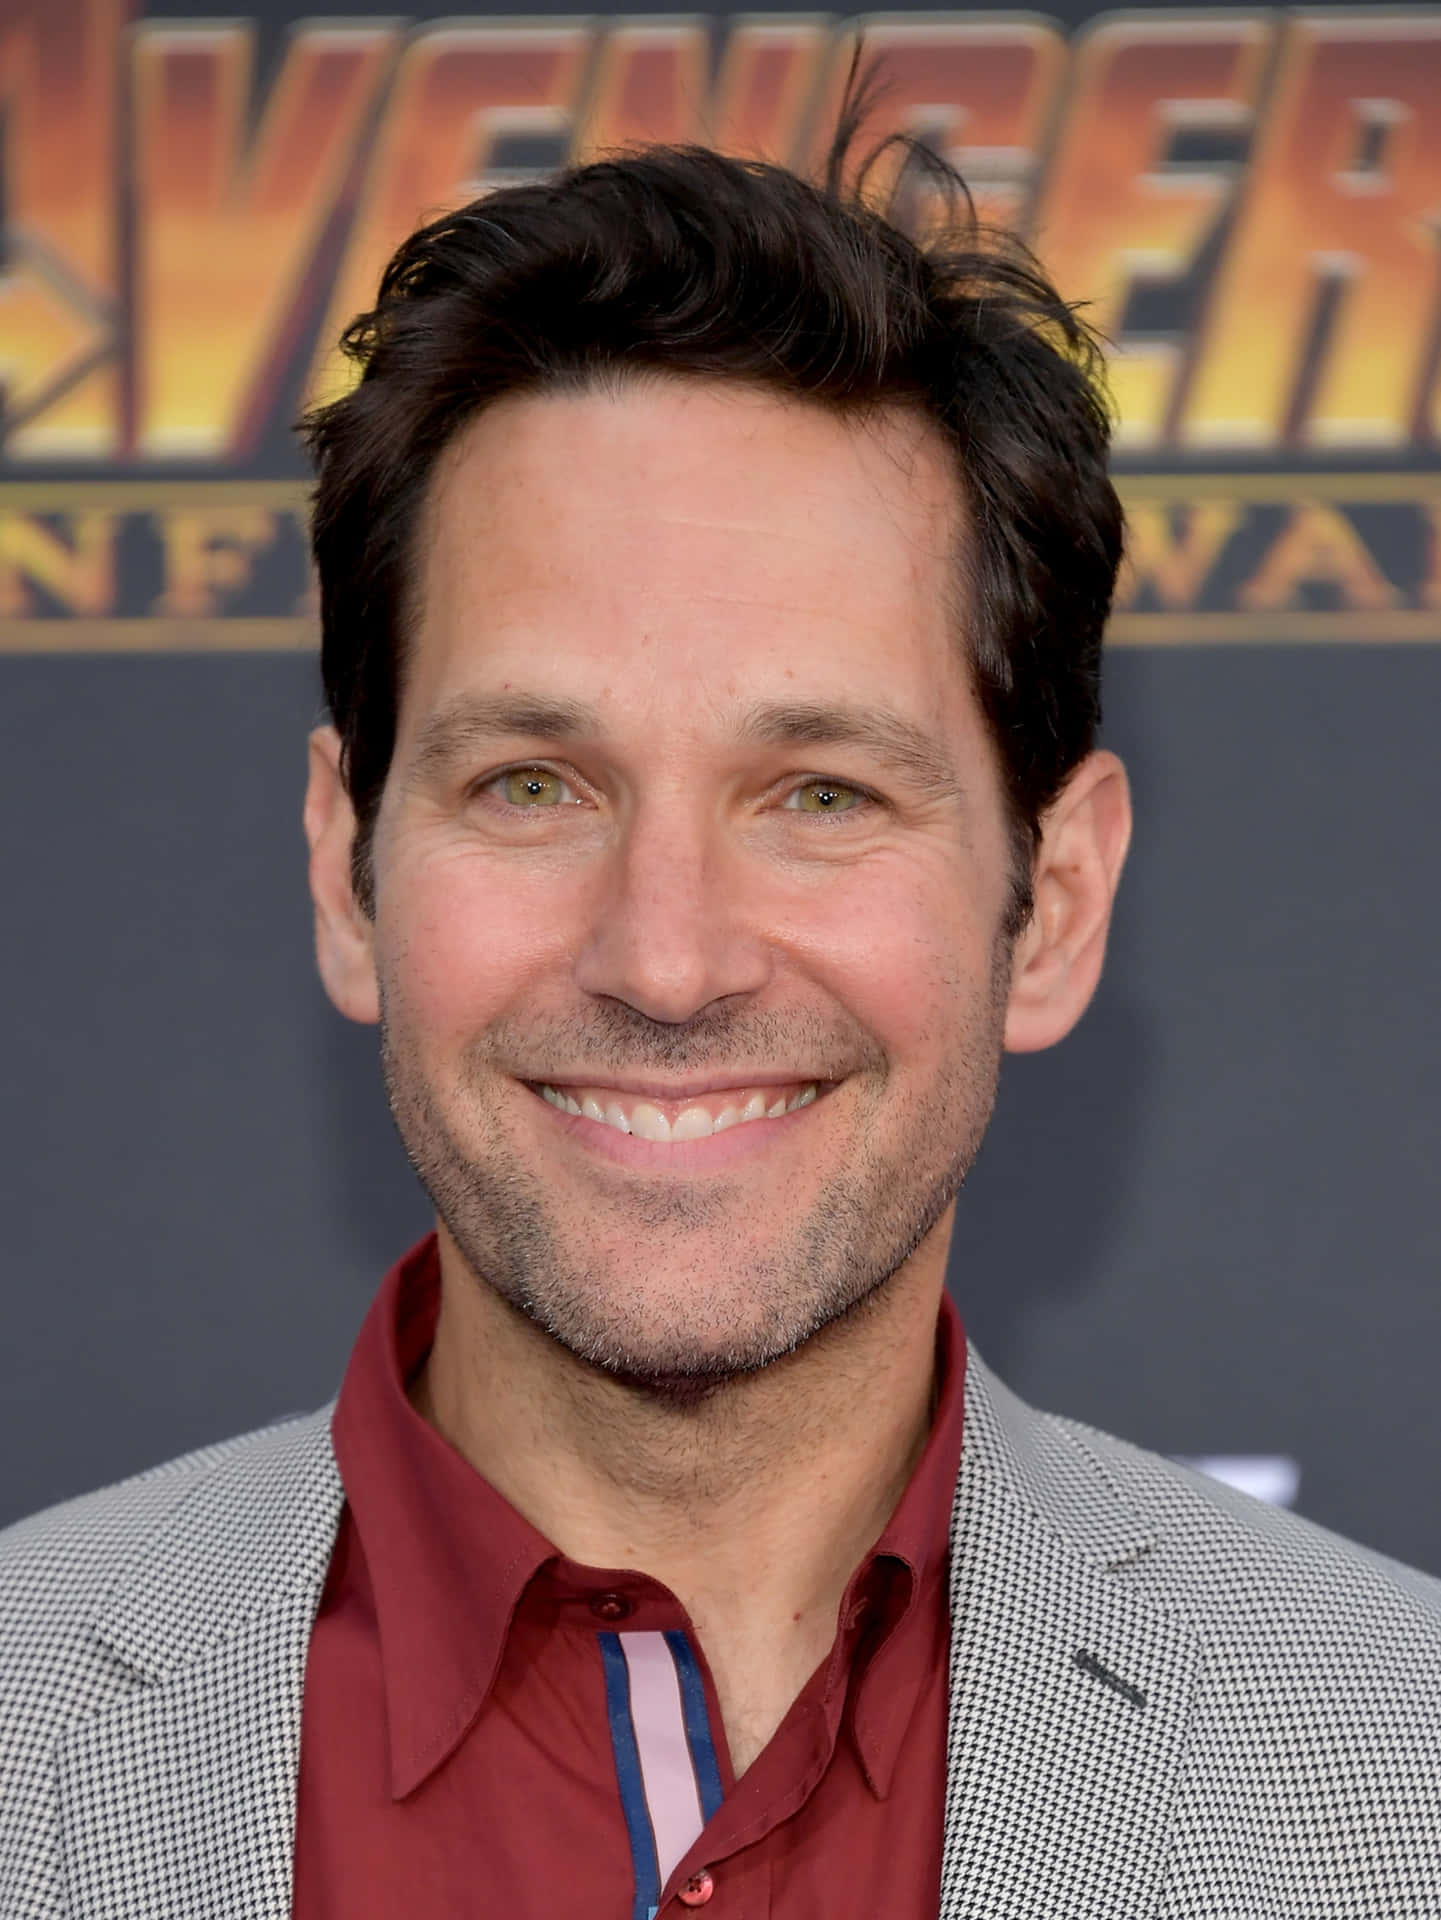 Actor Paul Rudd in a smart casual outfit Wallpaper